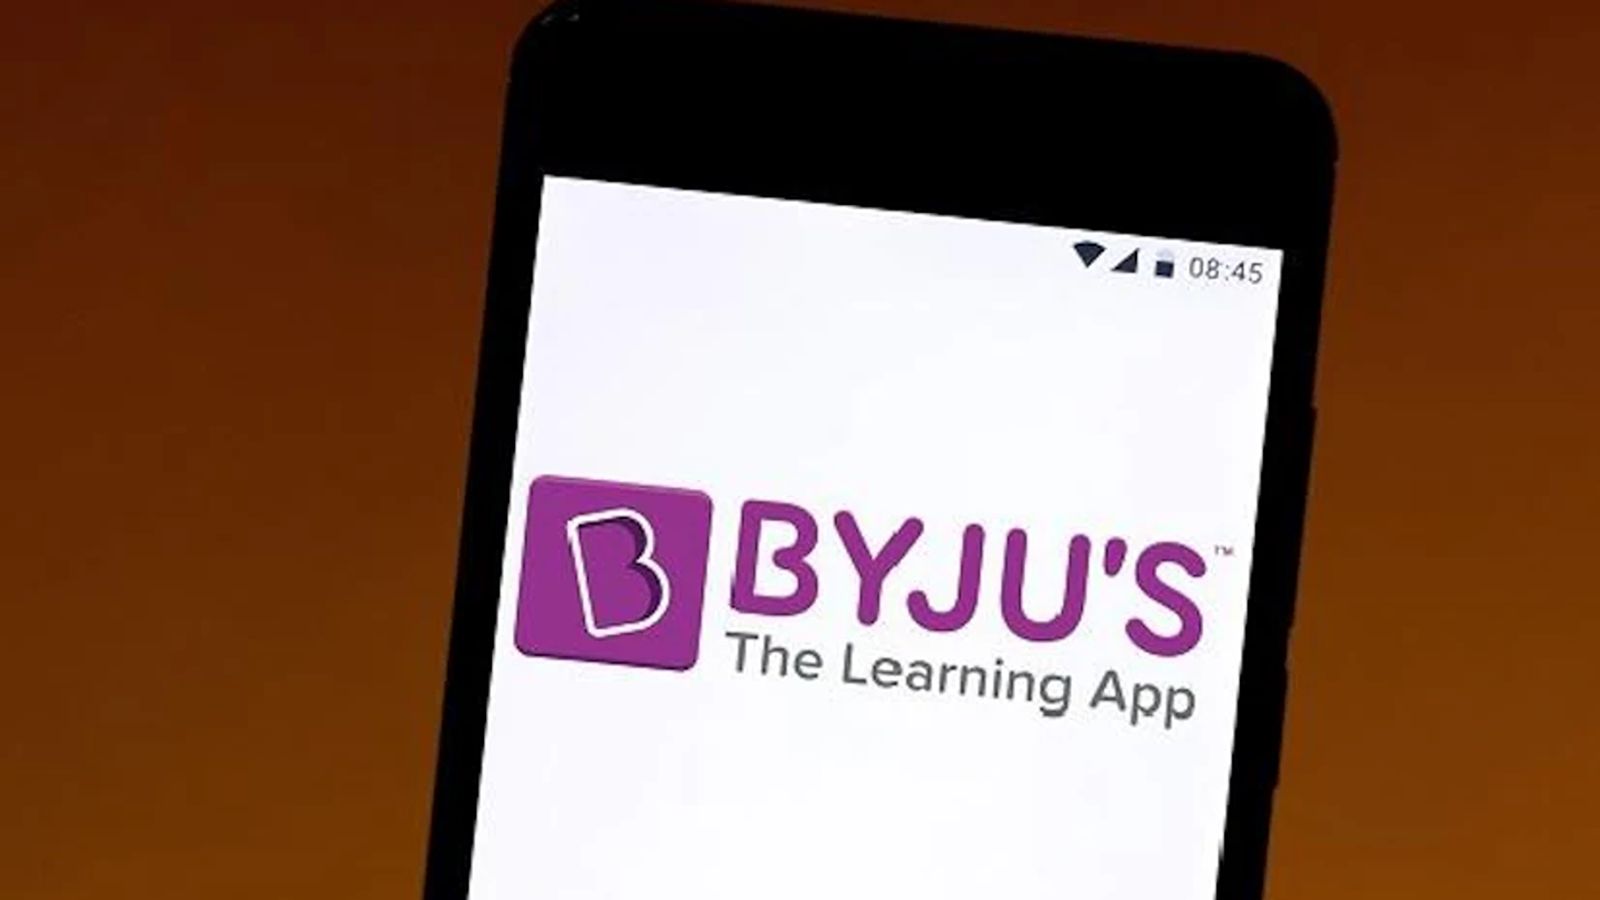 BYJU's Accuses TLB Lenders of Demanding Immediate Payment Amid Ongoing Legal Challenge